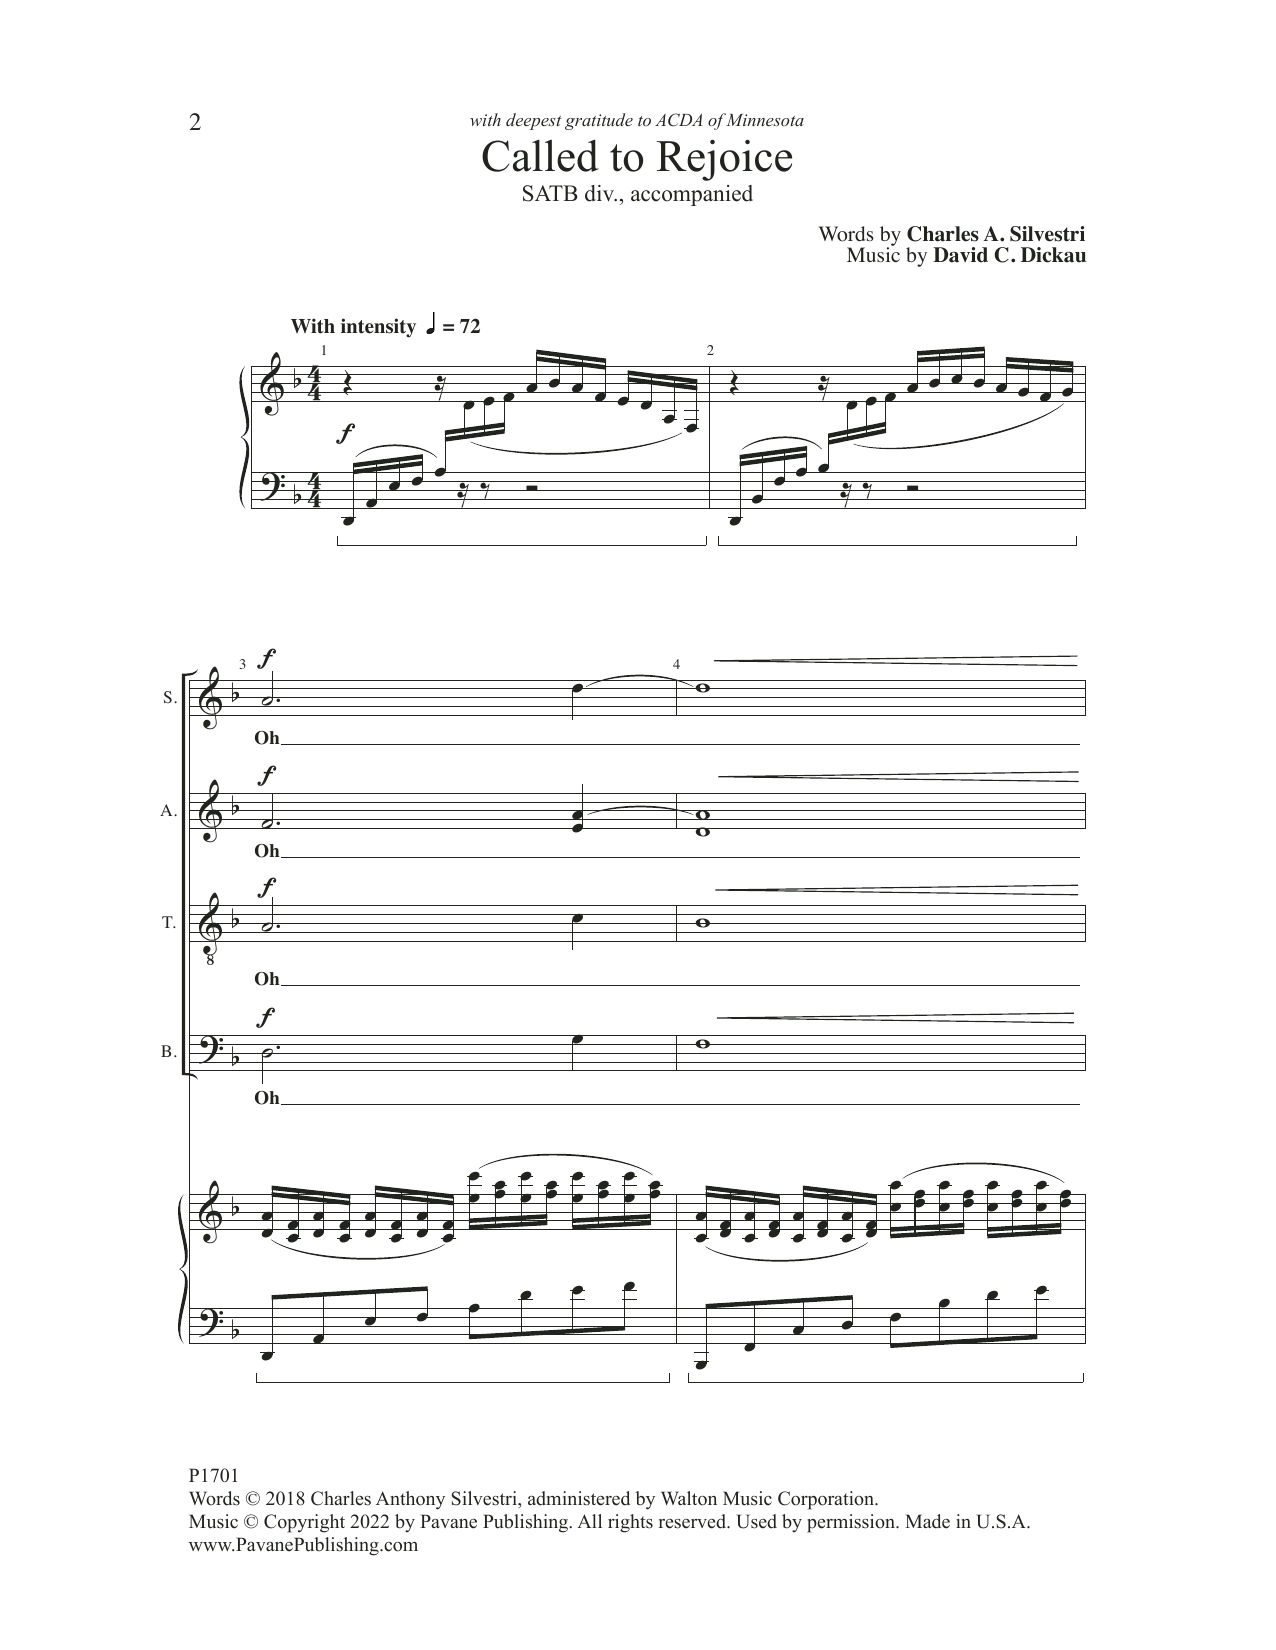 Download Charles A. Silvestri and David C. Di Called to Rejoice Sheet Music